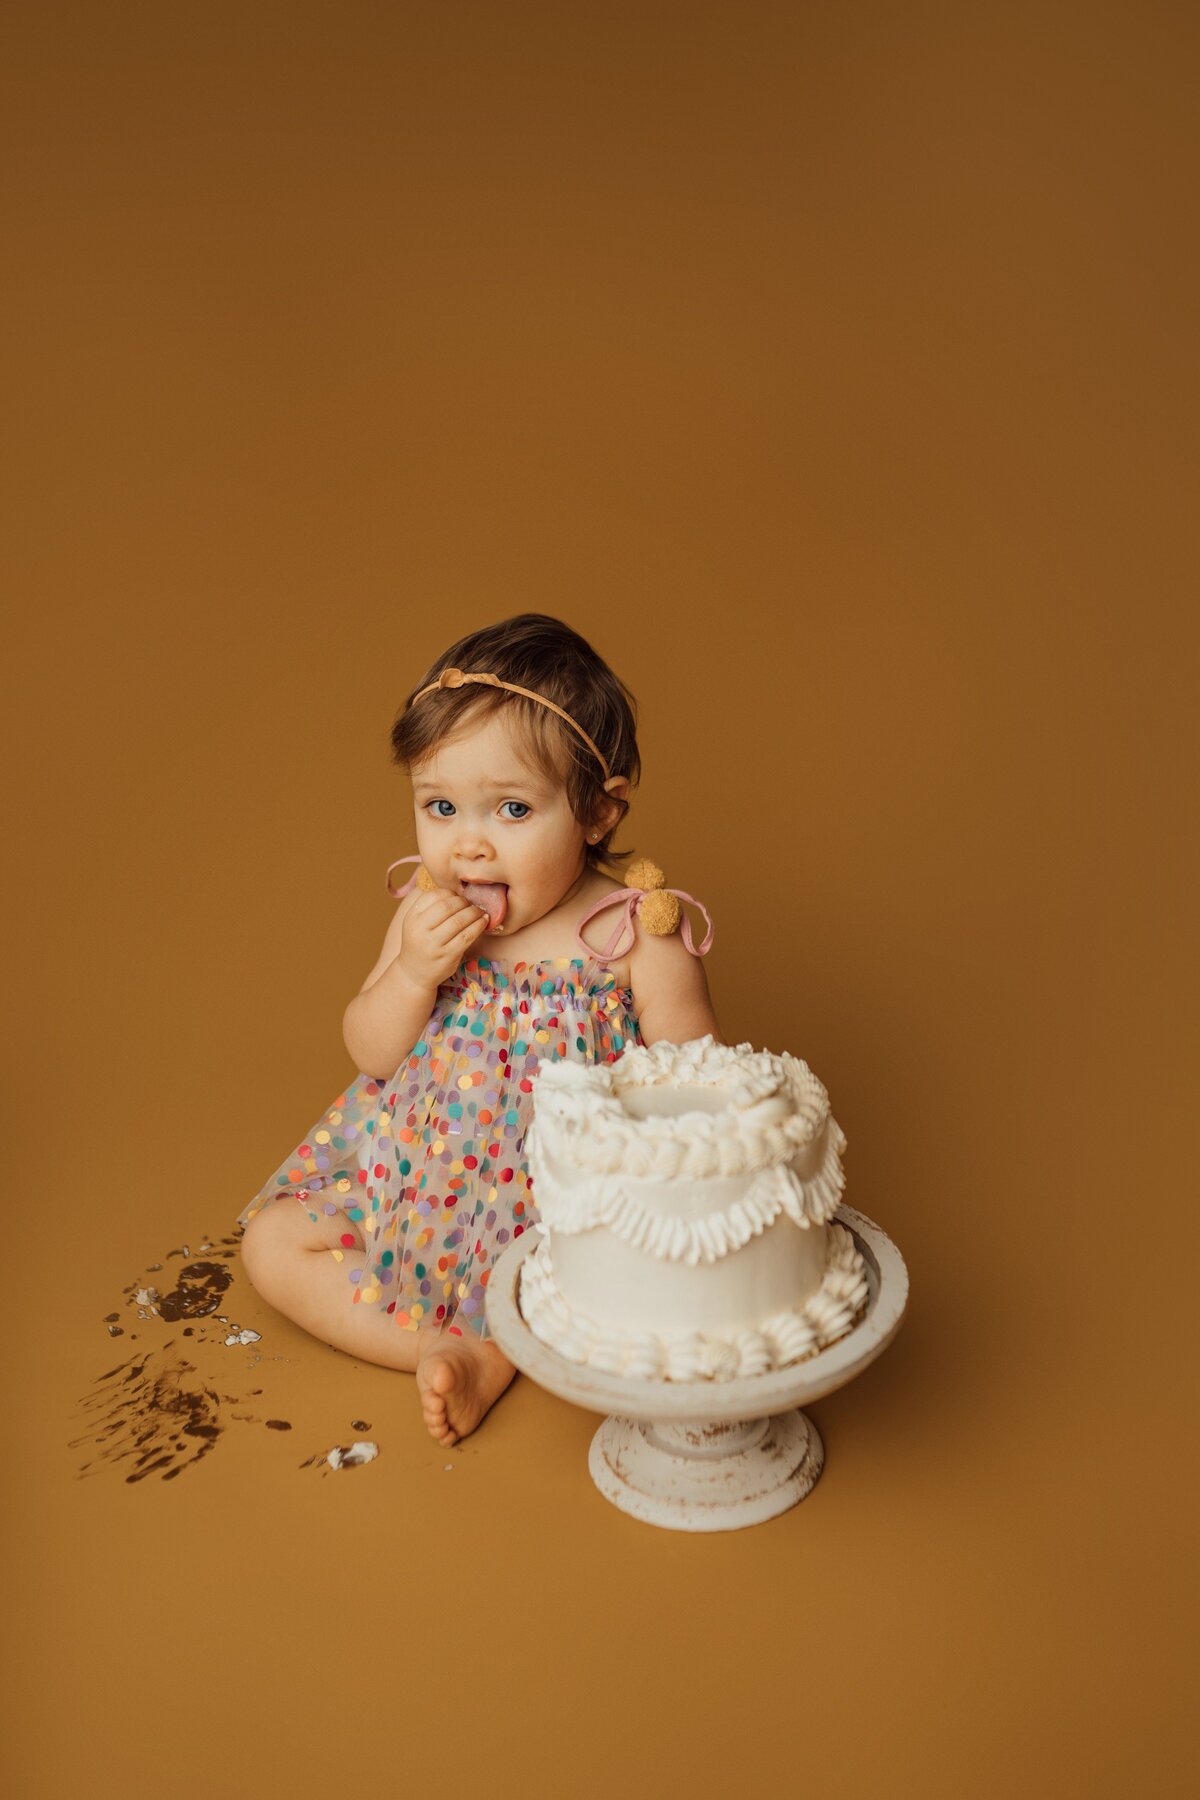 girl eating cake during cake smash photography session in Tampa, FL